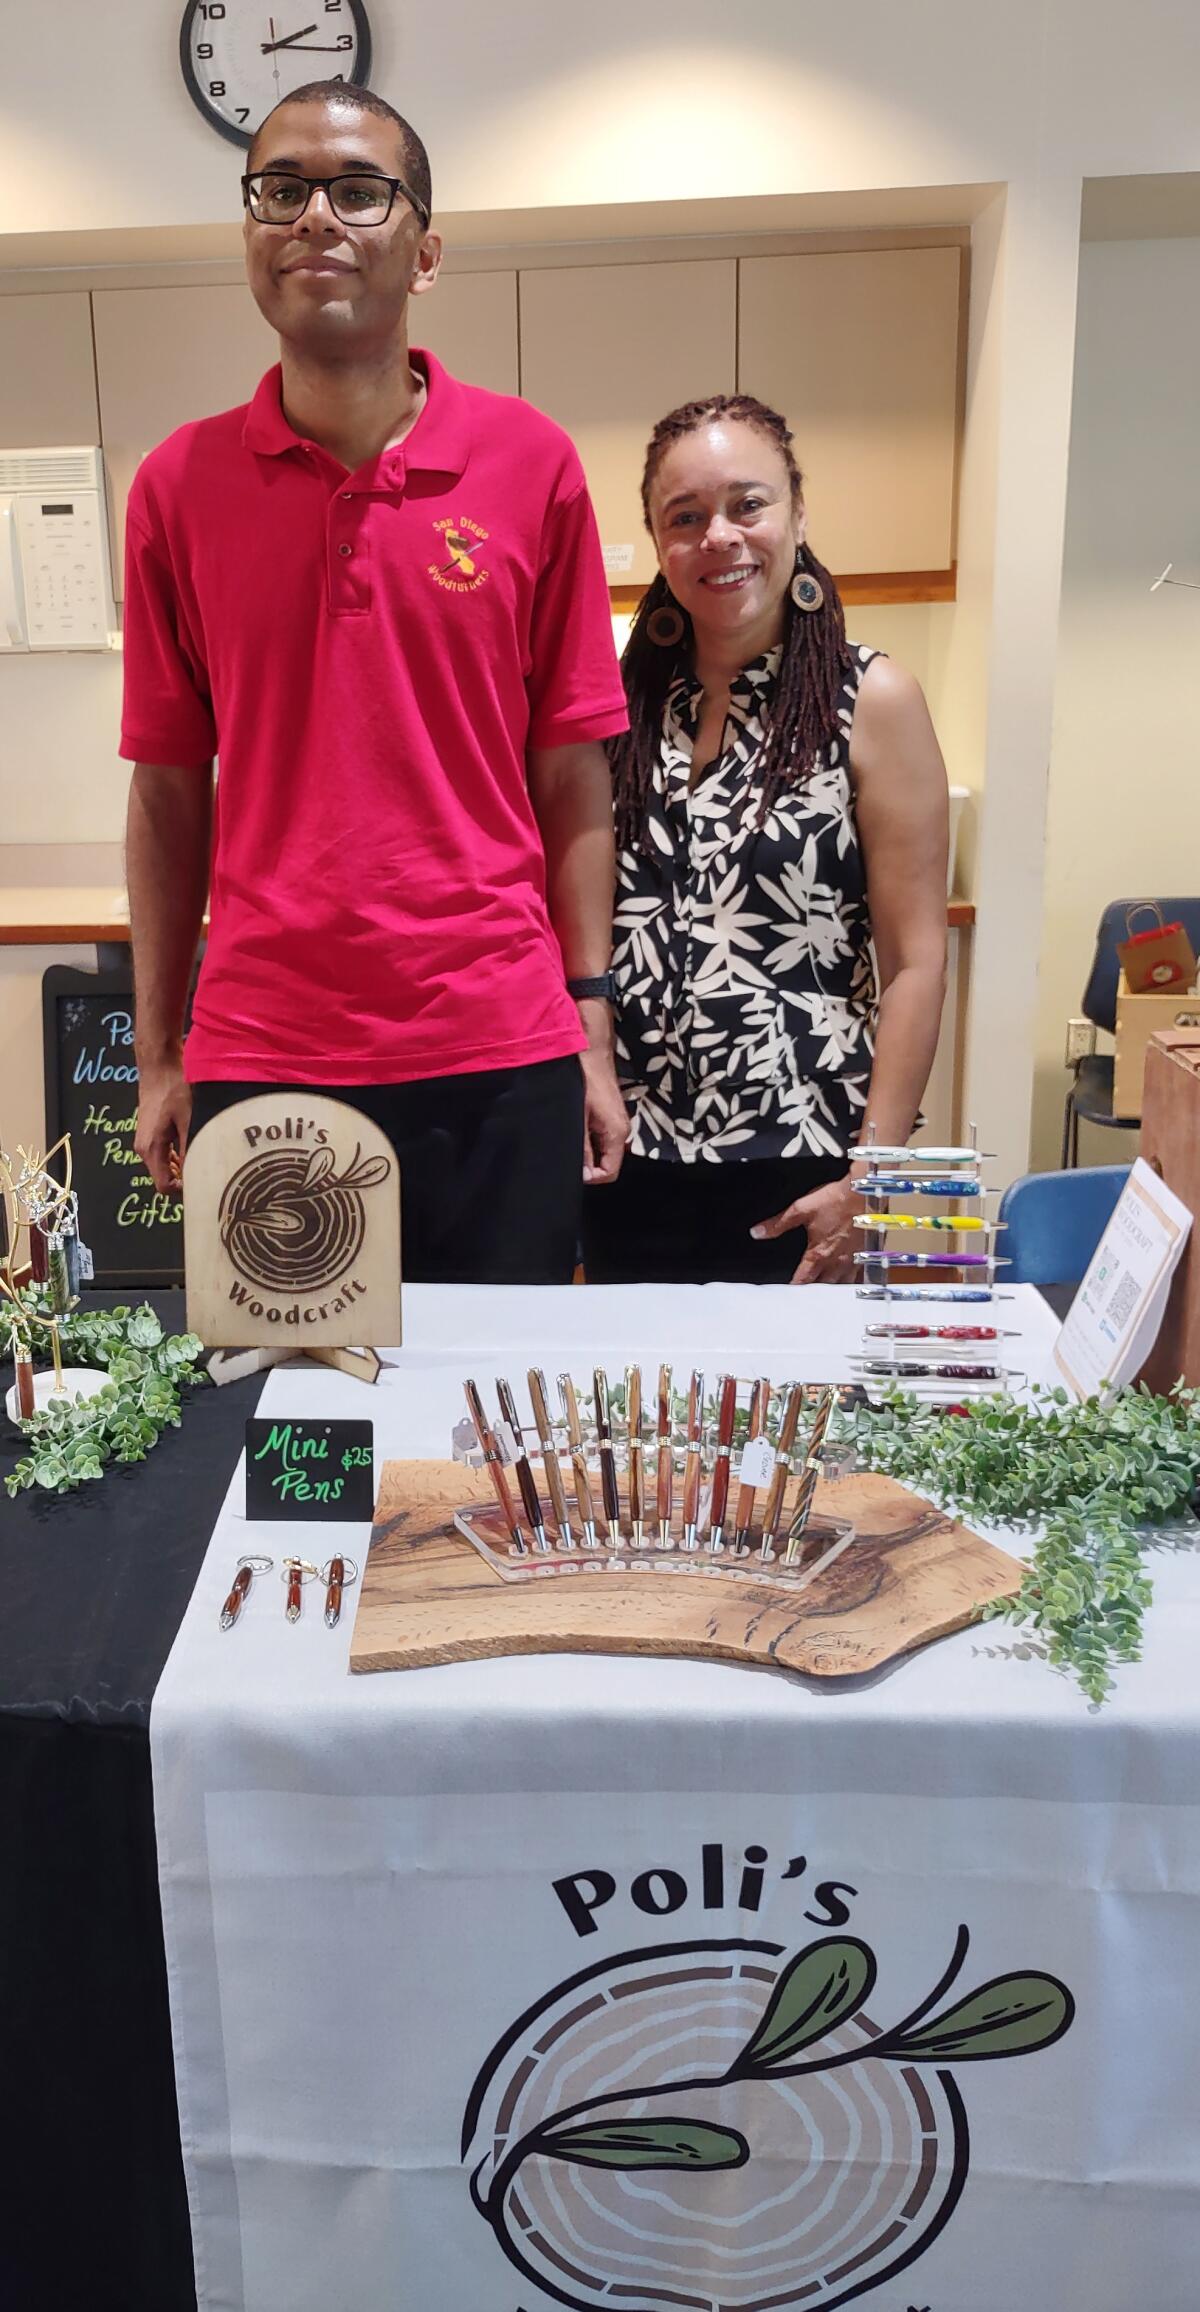 Poli’s Woodcraft owner Policarpo “Poli” Despaigne, left, makes pens and sells them with help from his mom, Jamaye Despaigne.